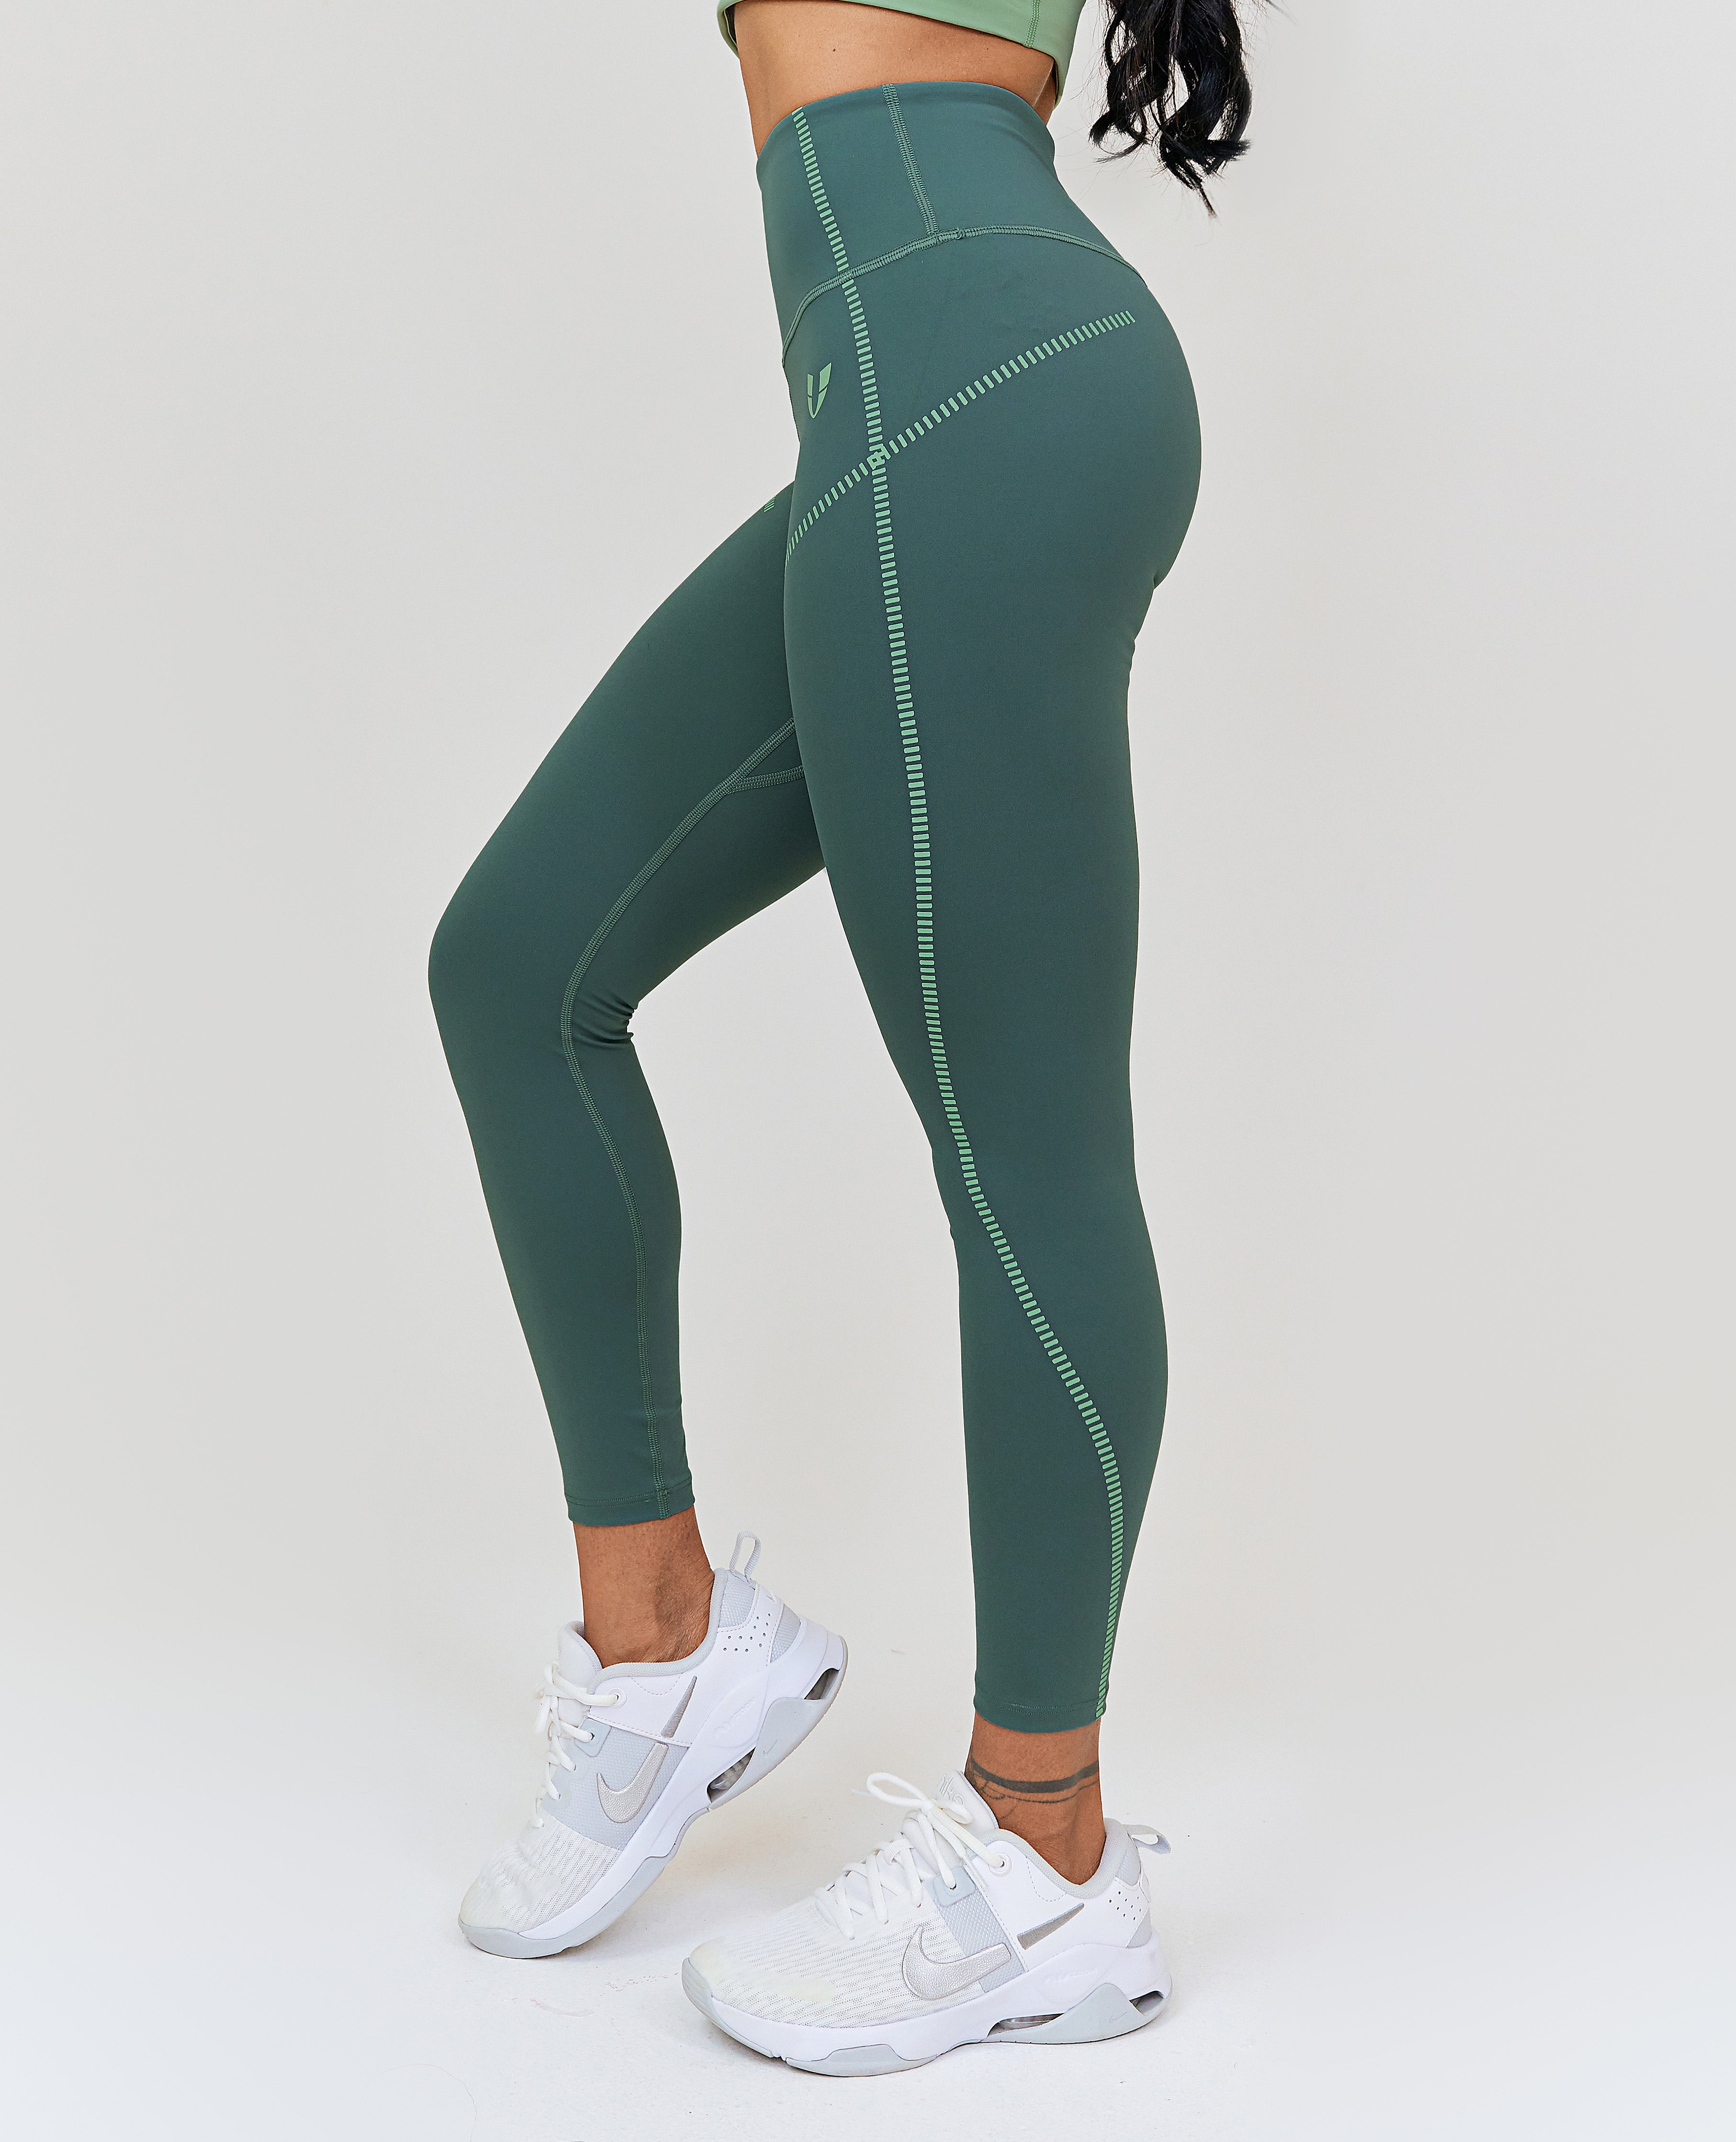 High Waisted Workout Leggings Brown